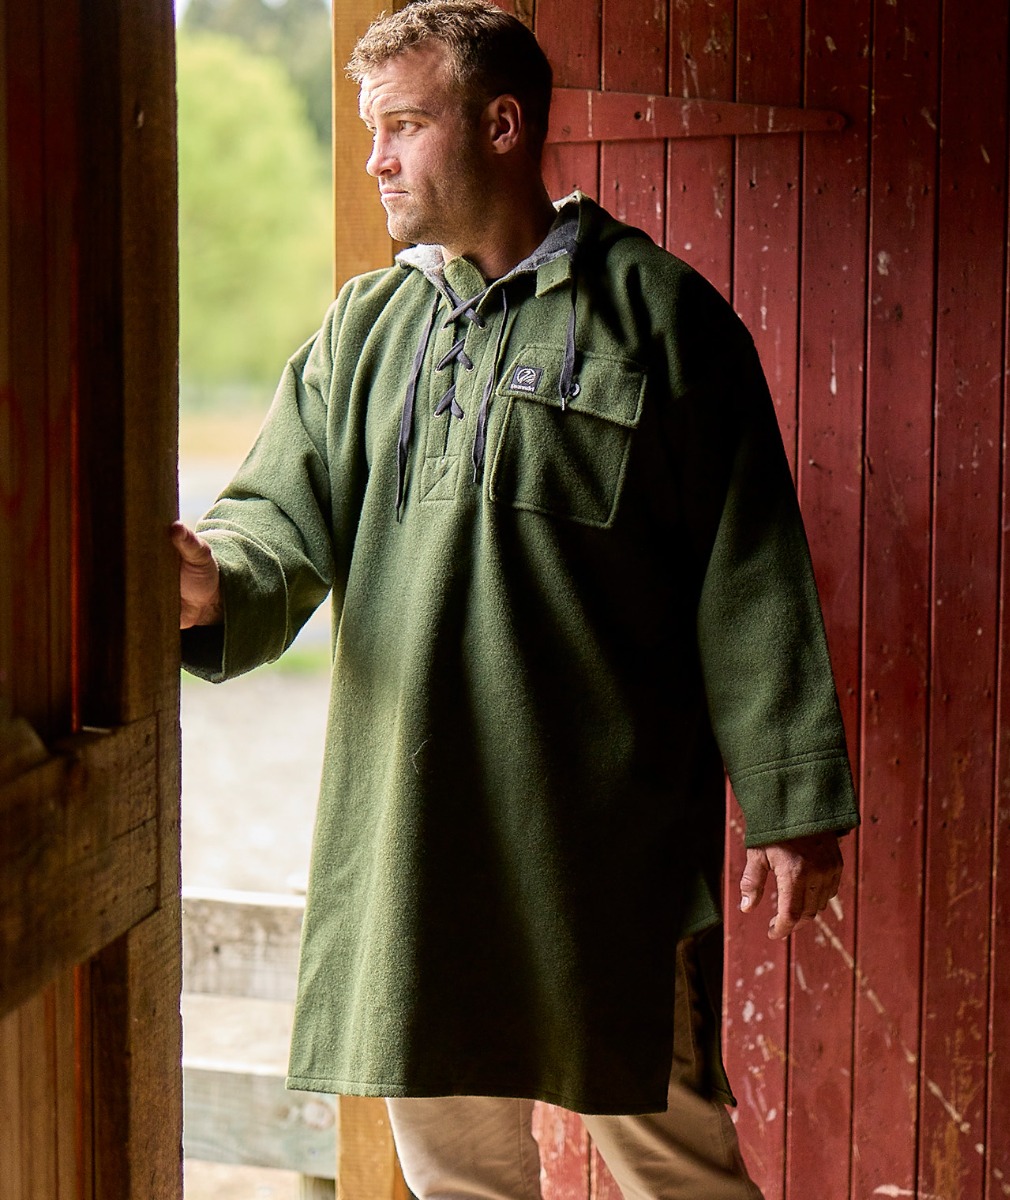 Men's Original Wool Bushshirt with Lace-up front